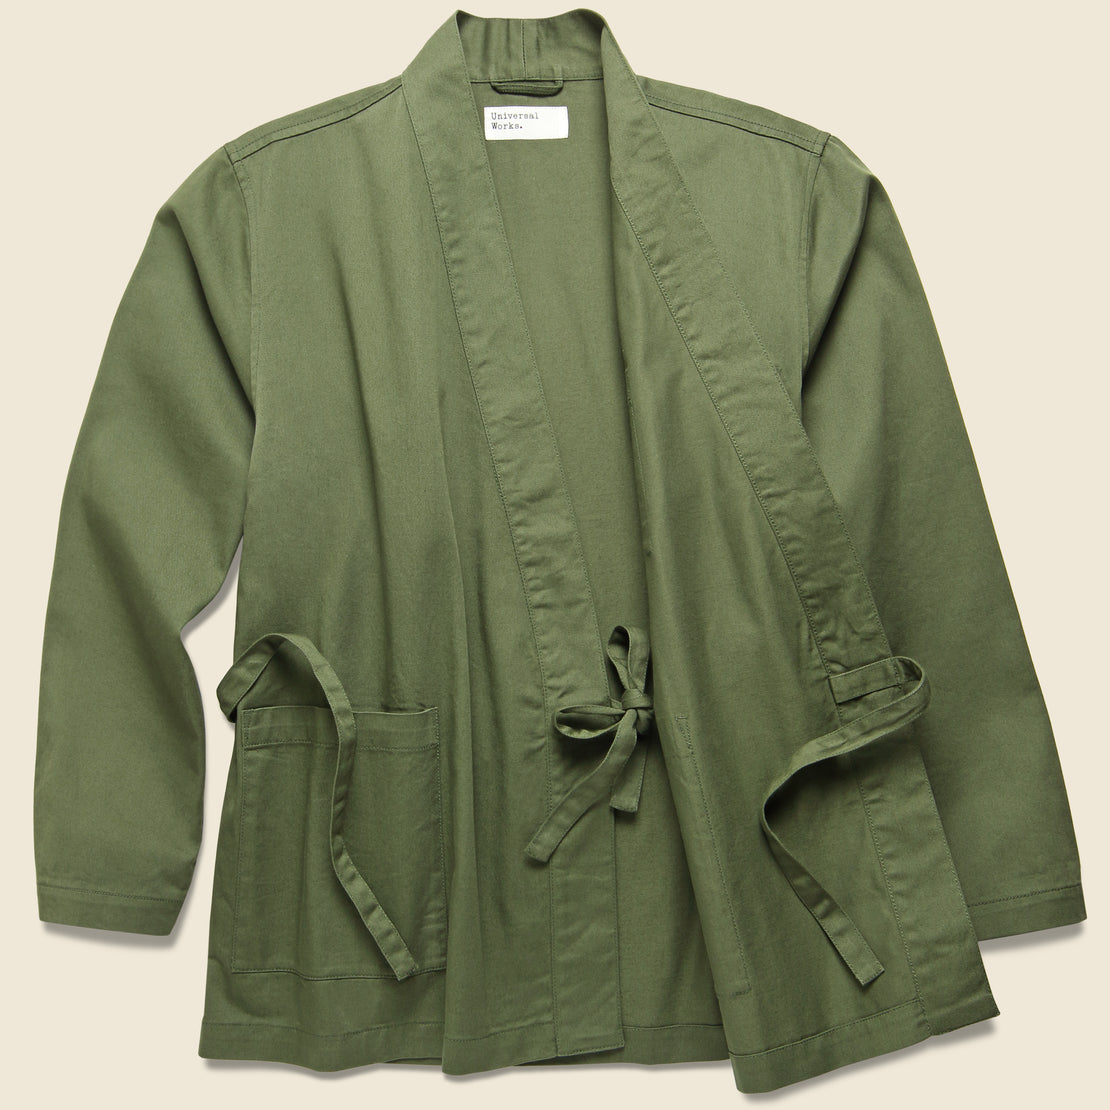 Kyoto Work Jacket - Olive - Universal Works - STAG Provisions - Outerwear - Shirt Jacket